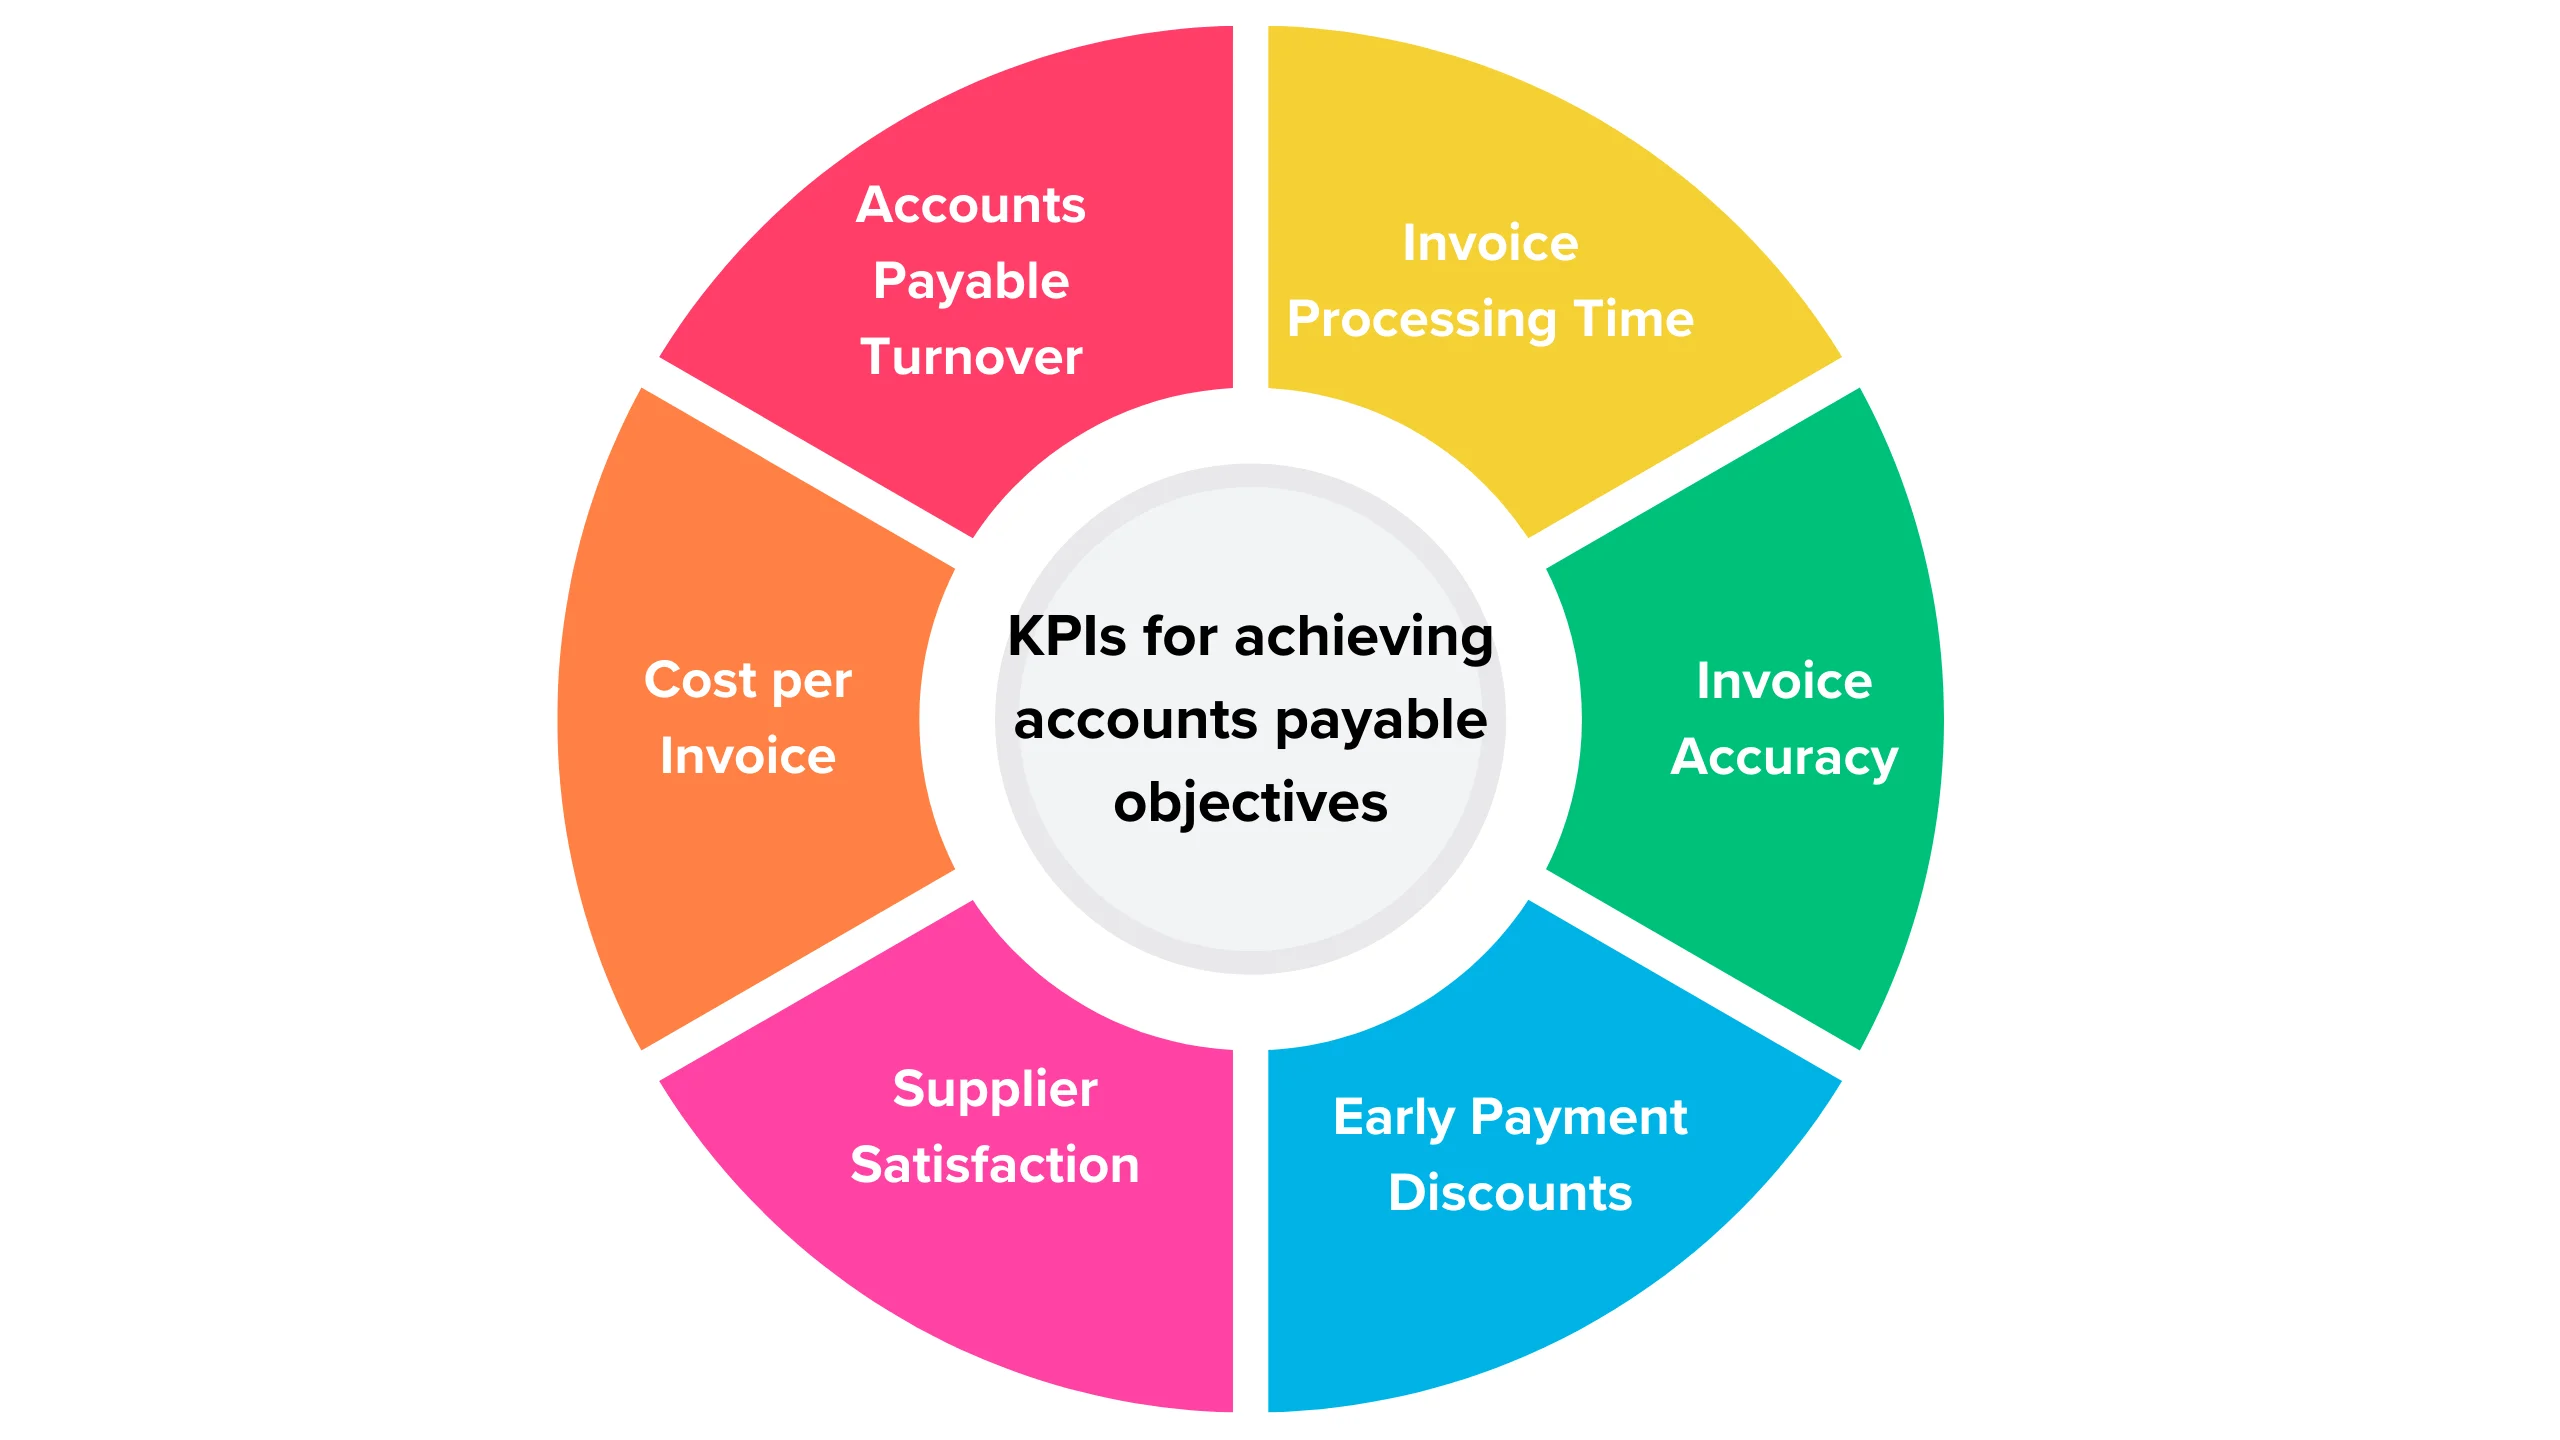 The average time taken to process an invoice from receipt to payment. This metric indicates the efficiency of the AP process.